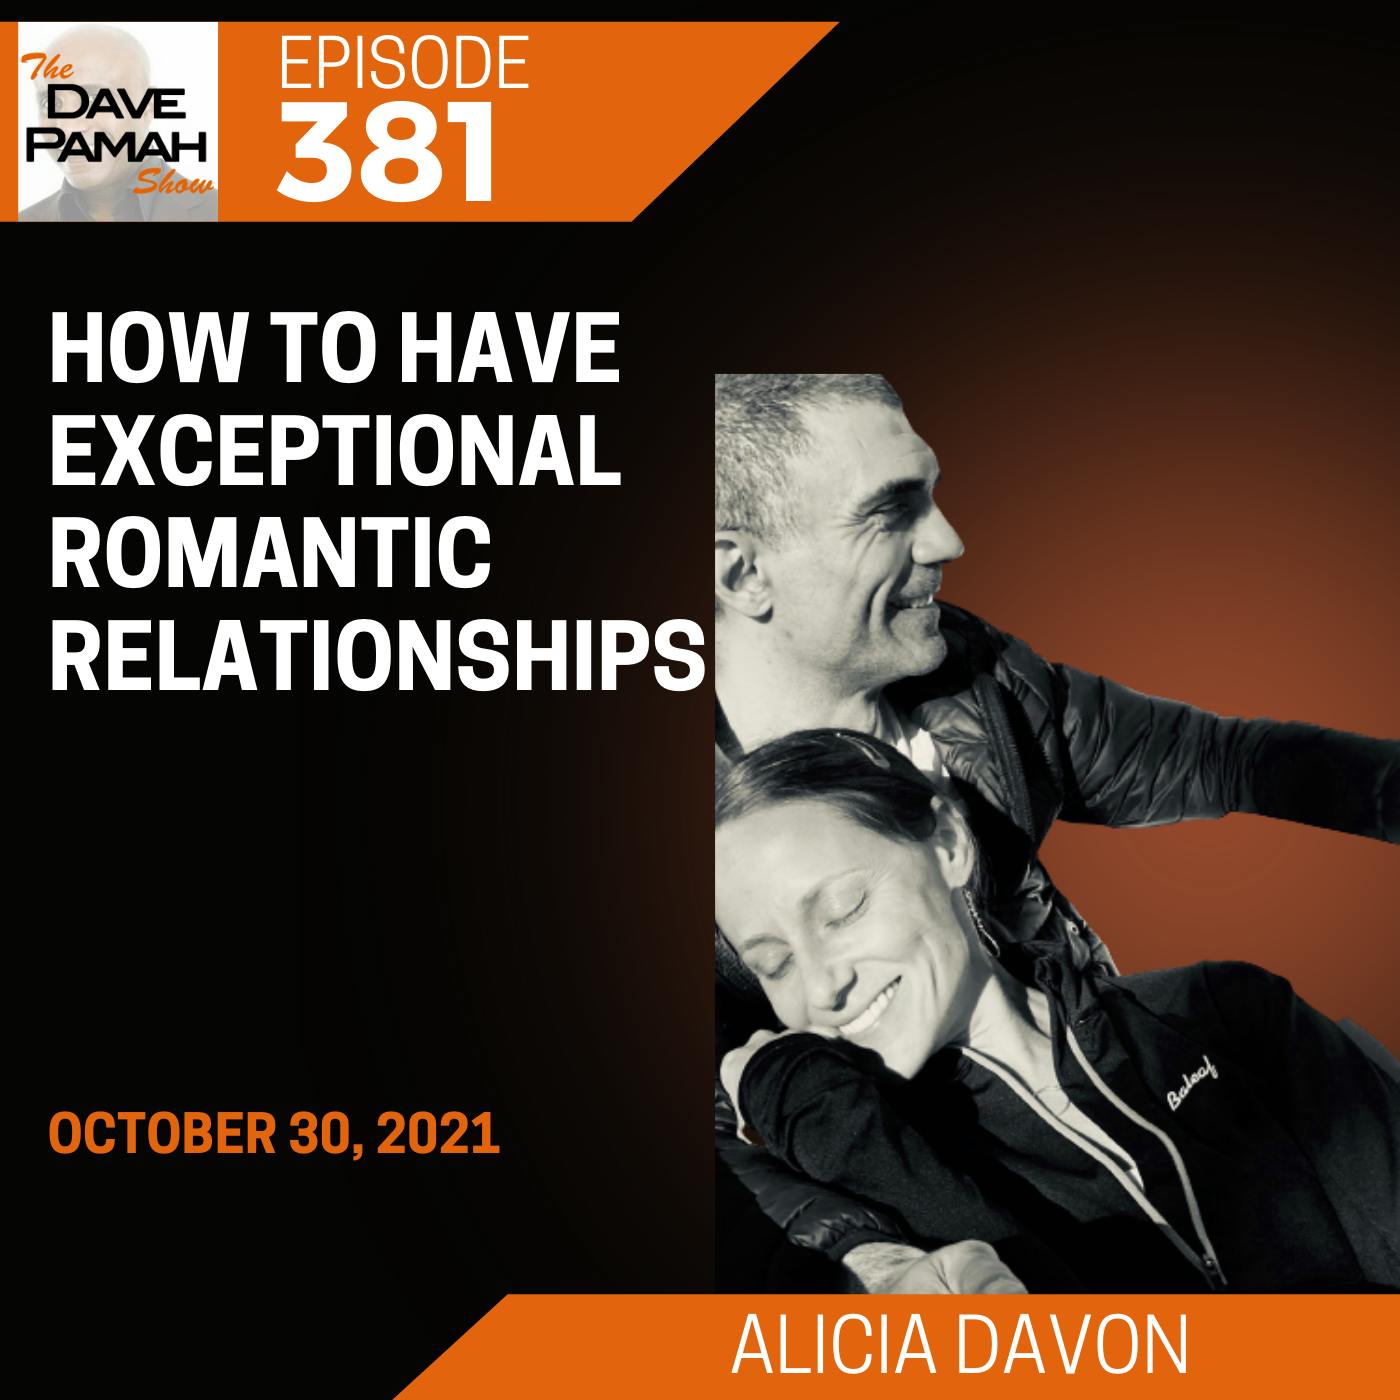 How to have exceptional romantic relationships with Alicia Davon Image